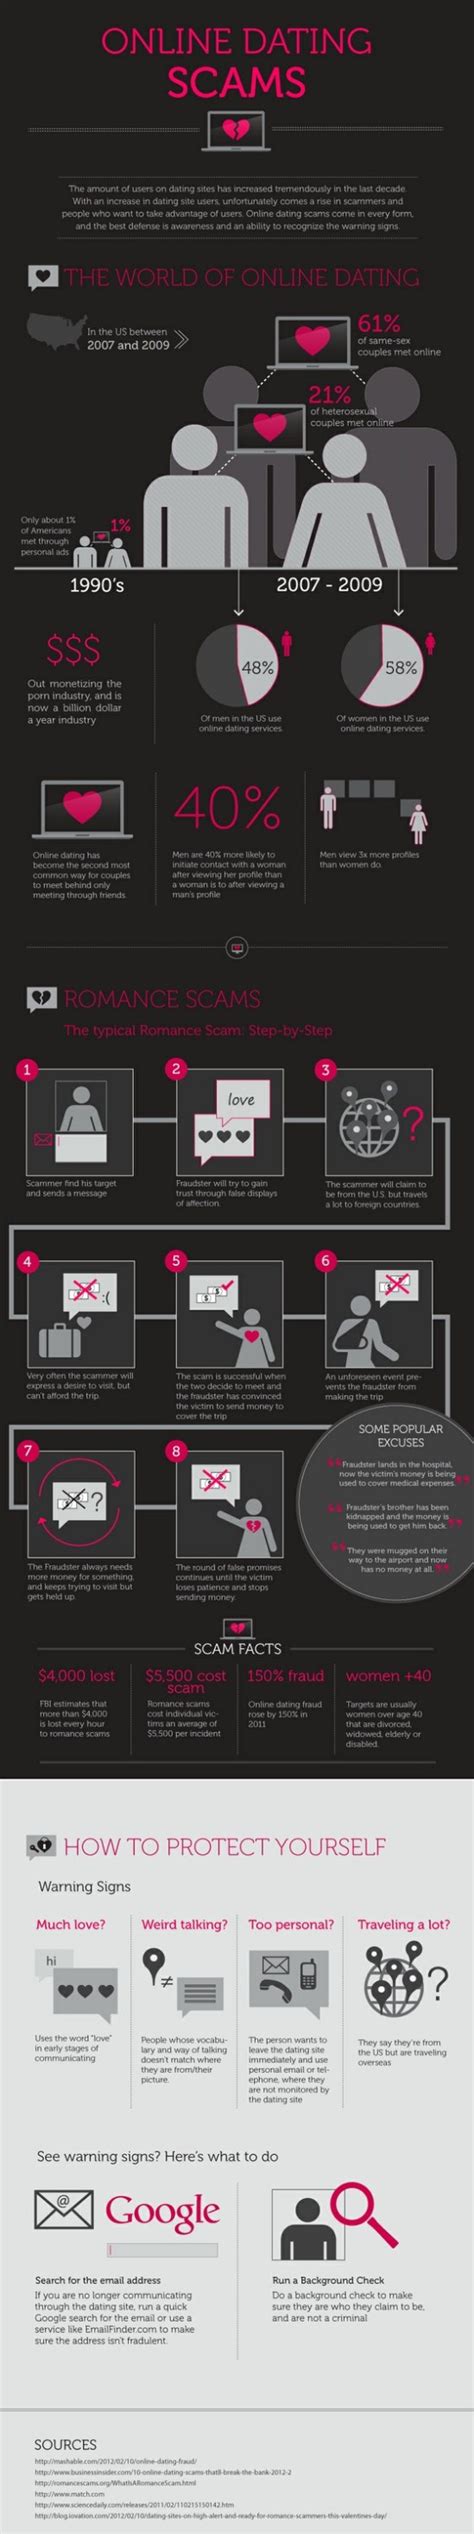 online dating scams infographic